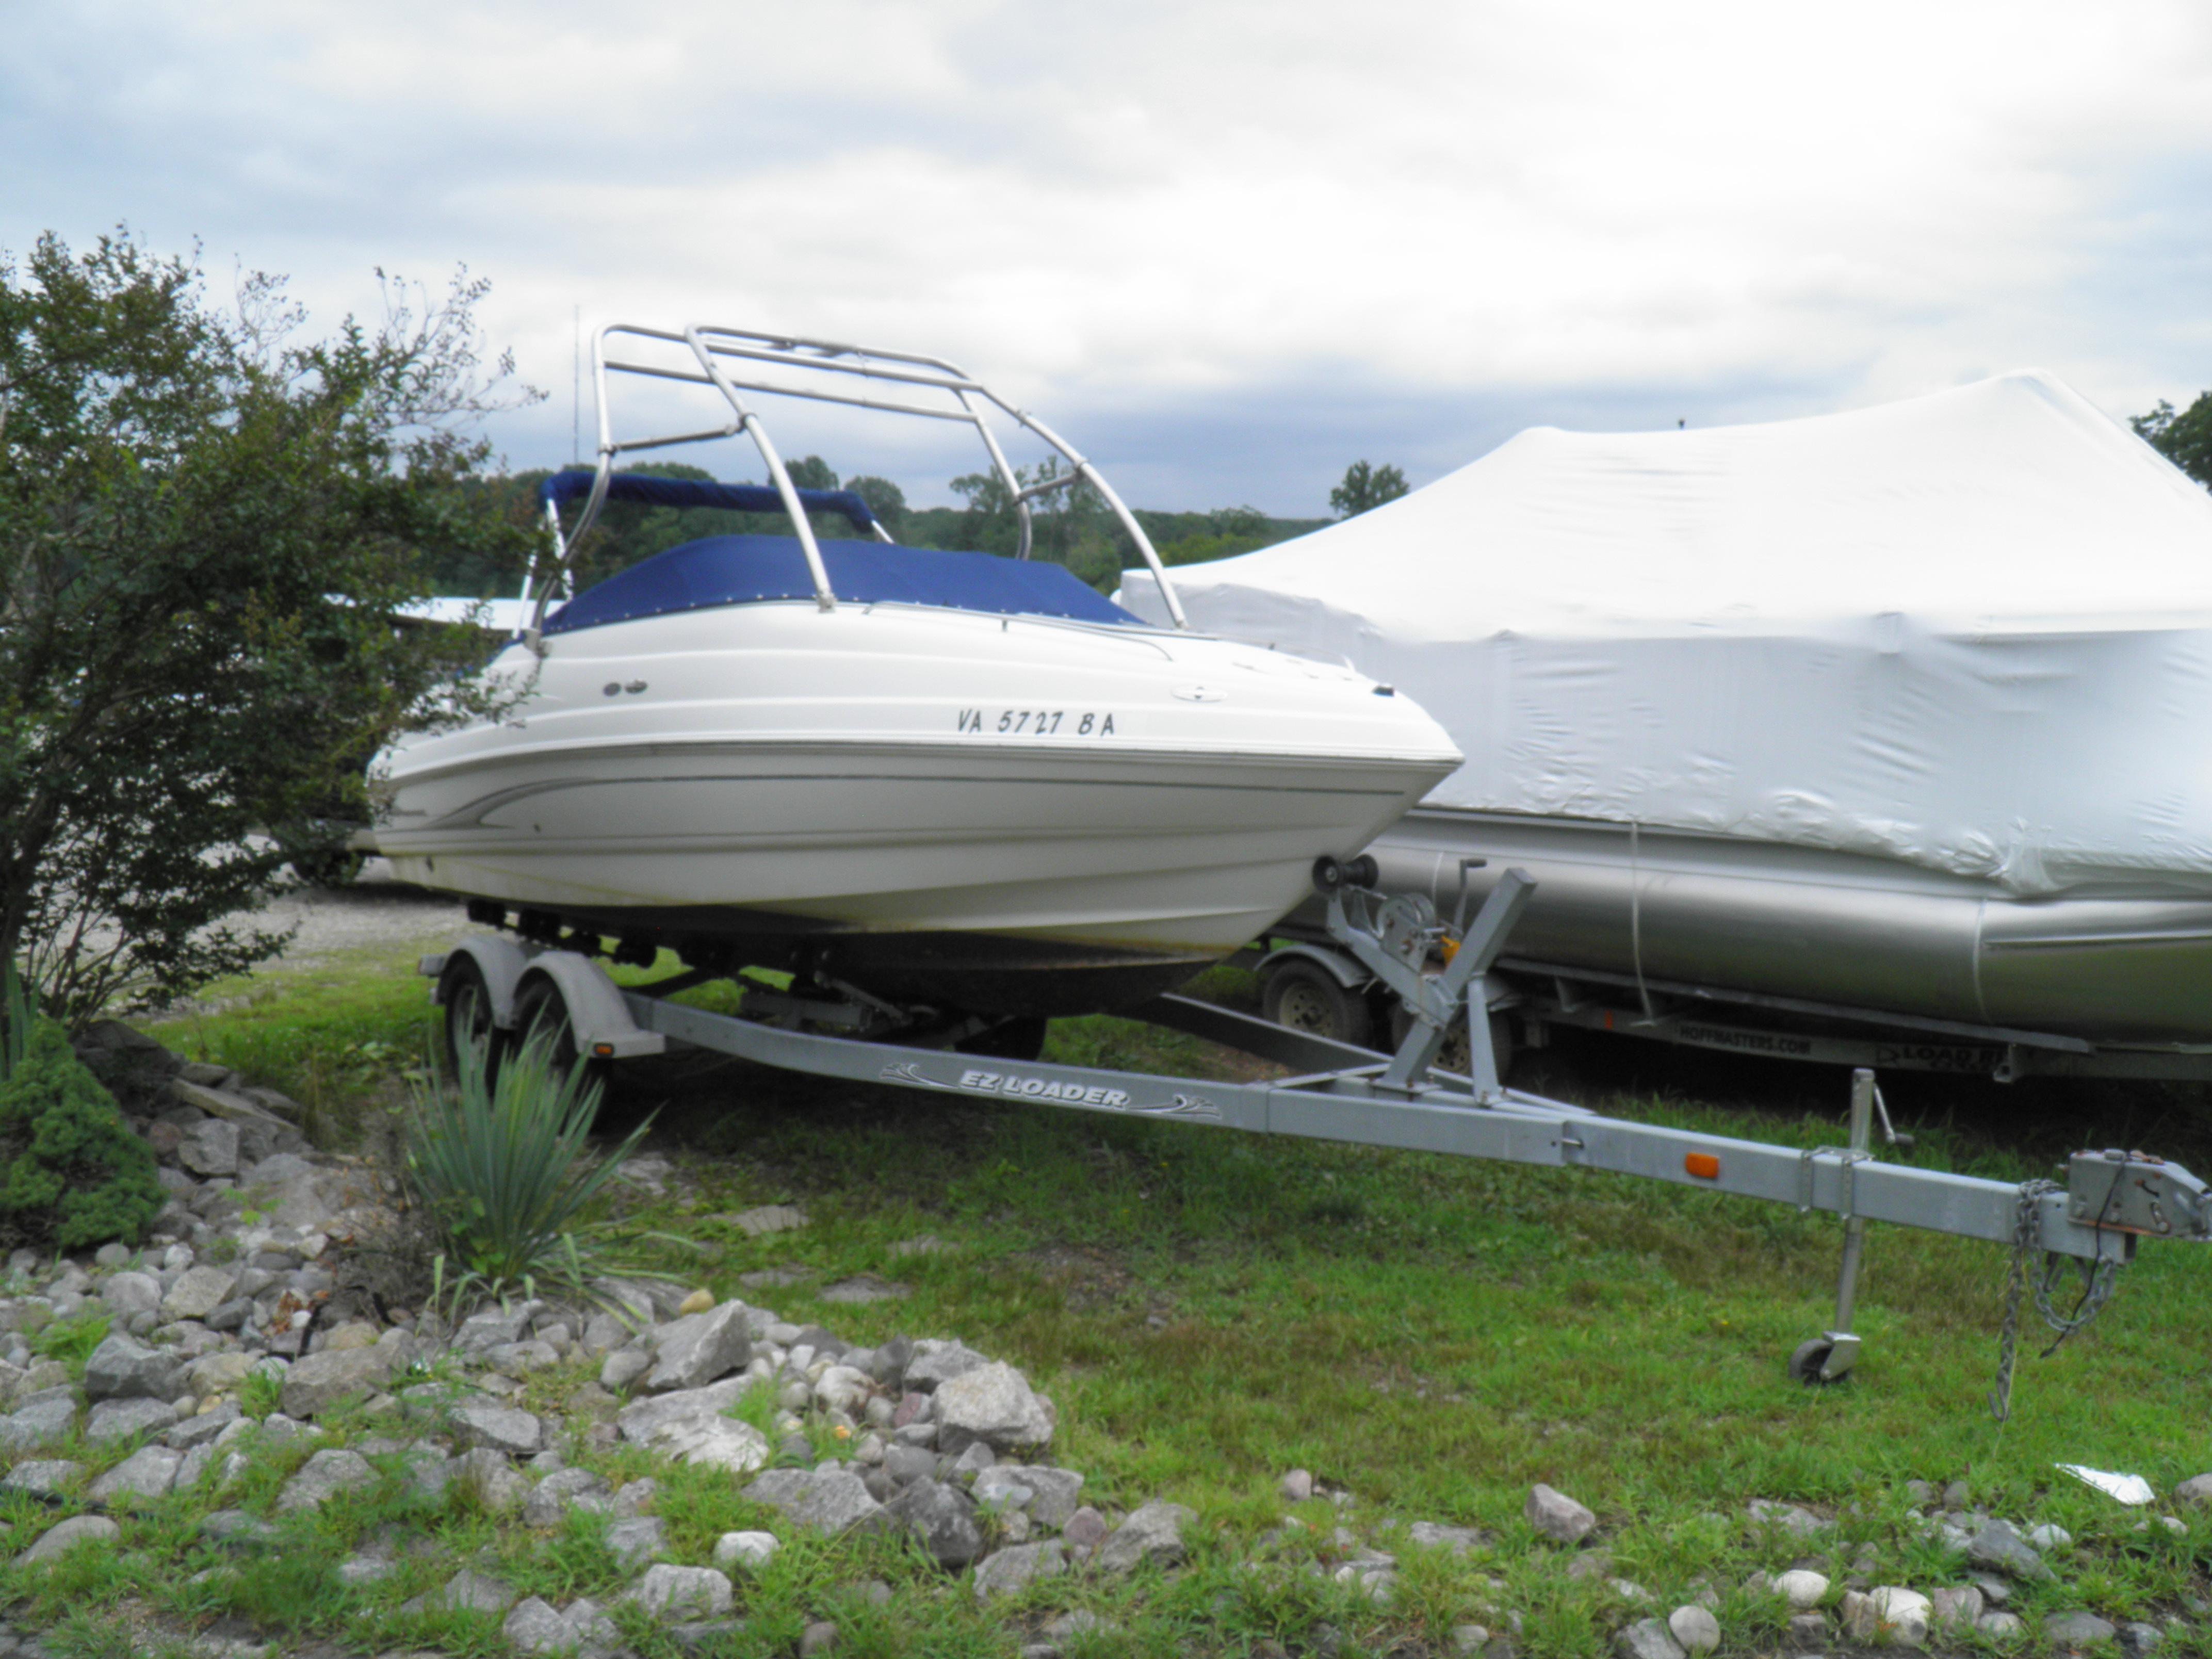 2003 Chaparral 215 SS